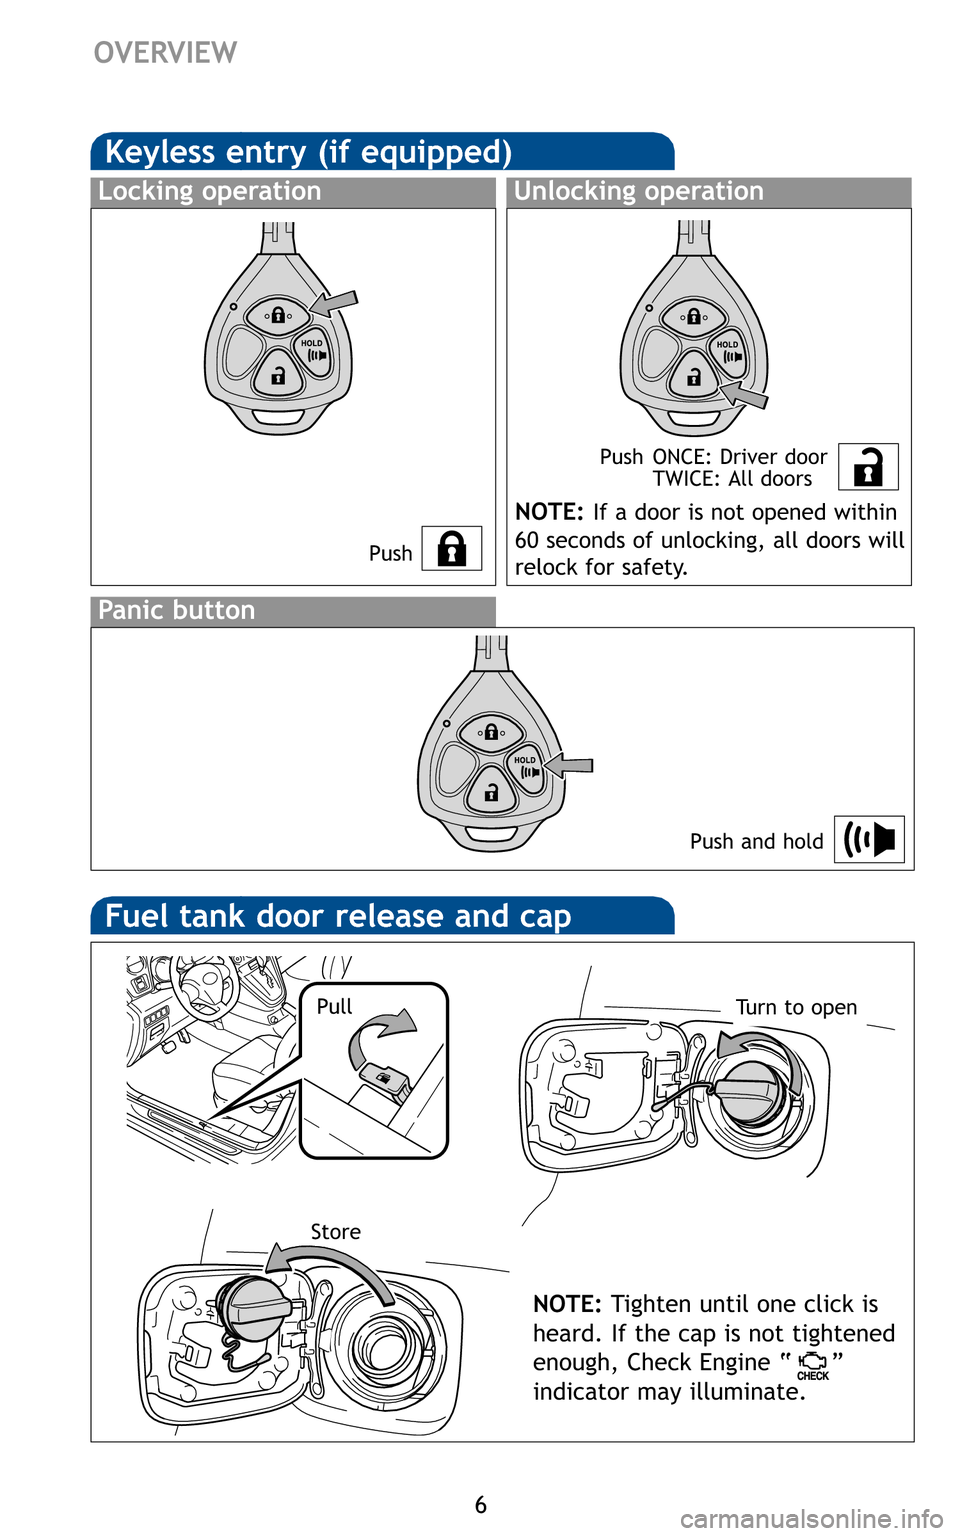 TOYOTA MATRIX 2011 E140 / 2.G Quick Reference Guide 6
OVERVIEW

Push Push ONCE: Driver door 
TWICE: All doors


Push and hold
NOTE:If a door is not opened within 
60 seconds of unlocking, all doors will 
relock for safety.

NOTE: Tighten until one clic